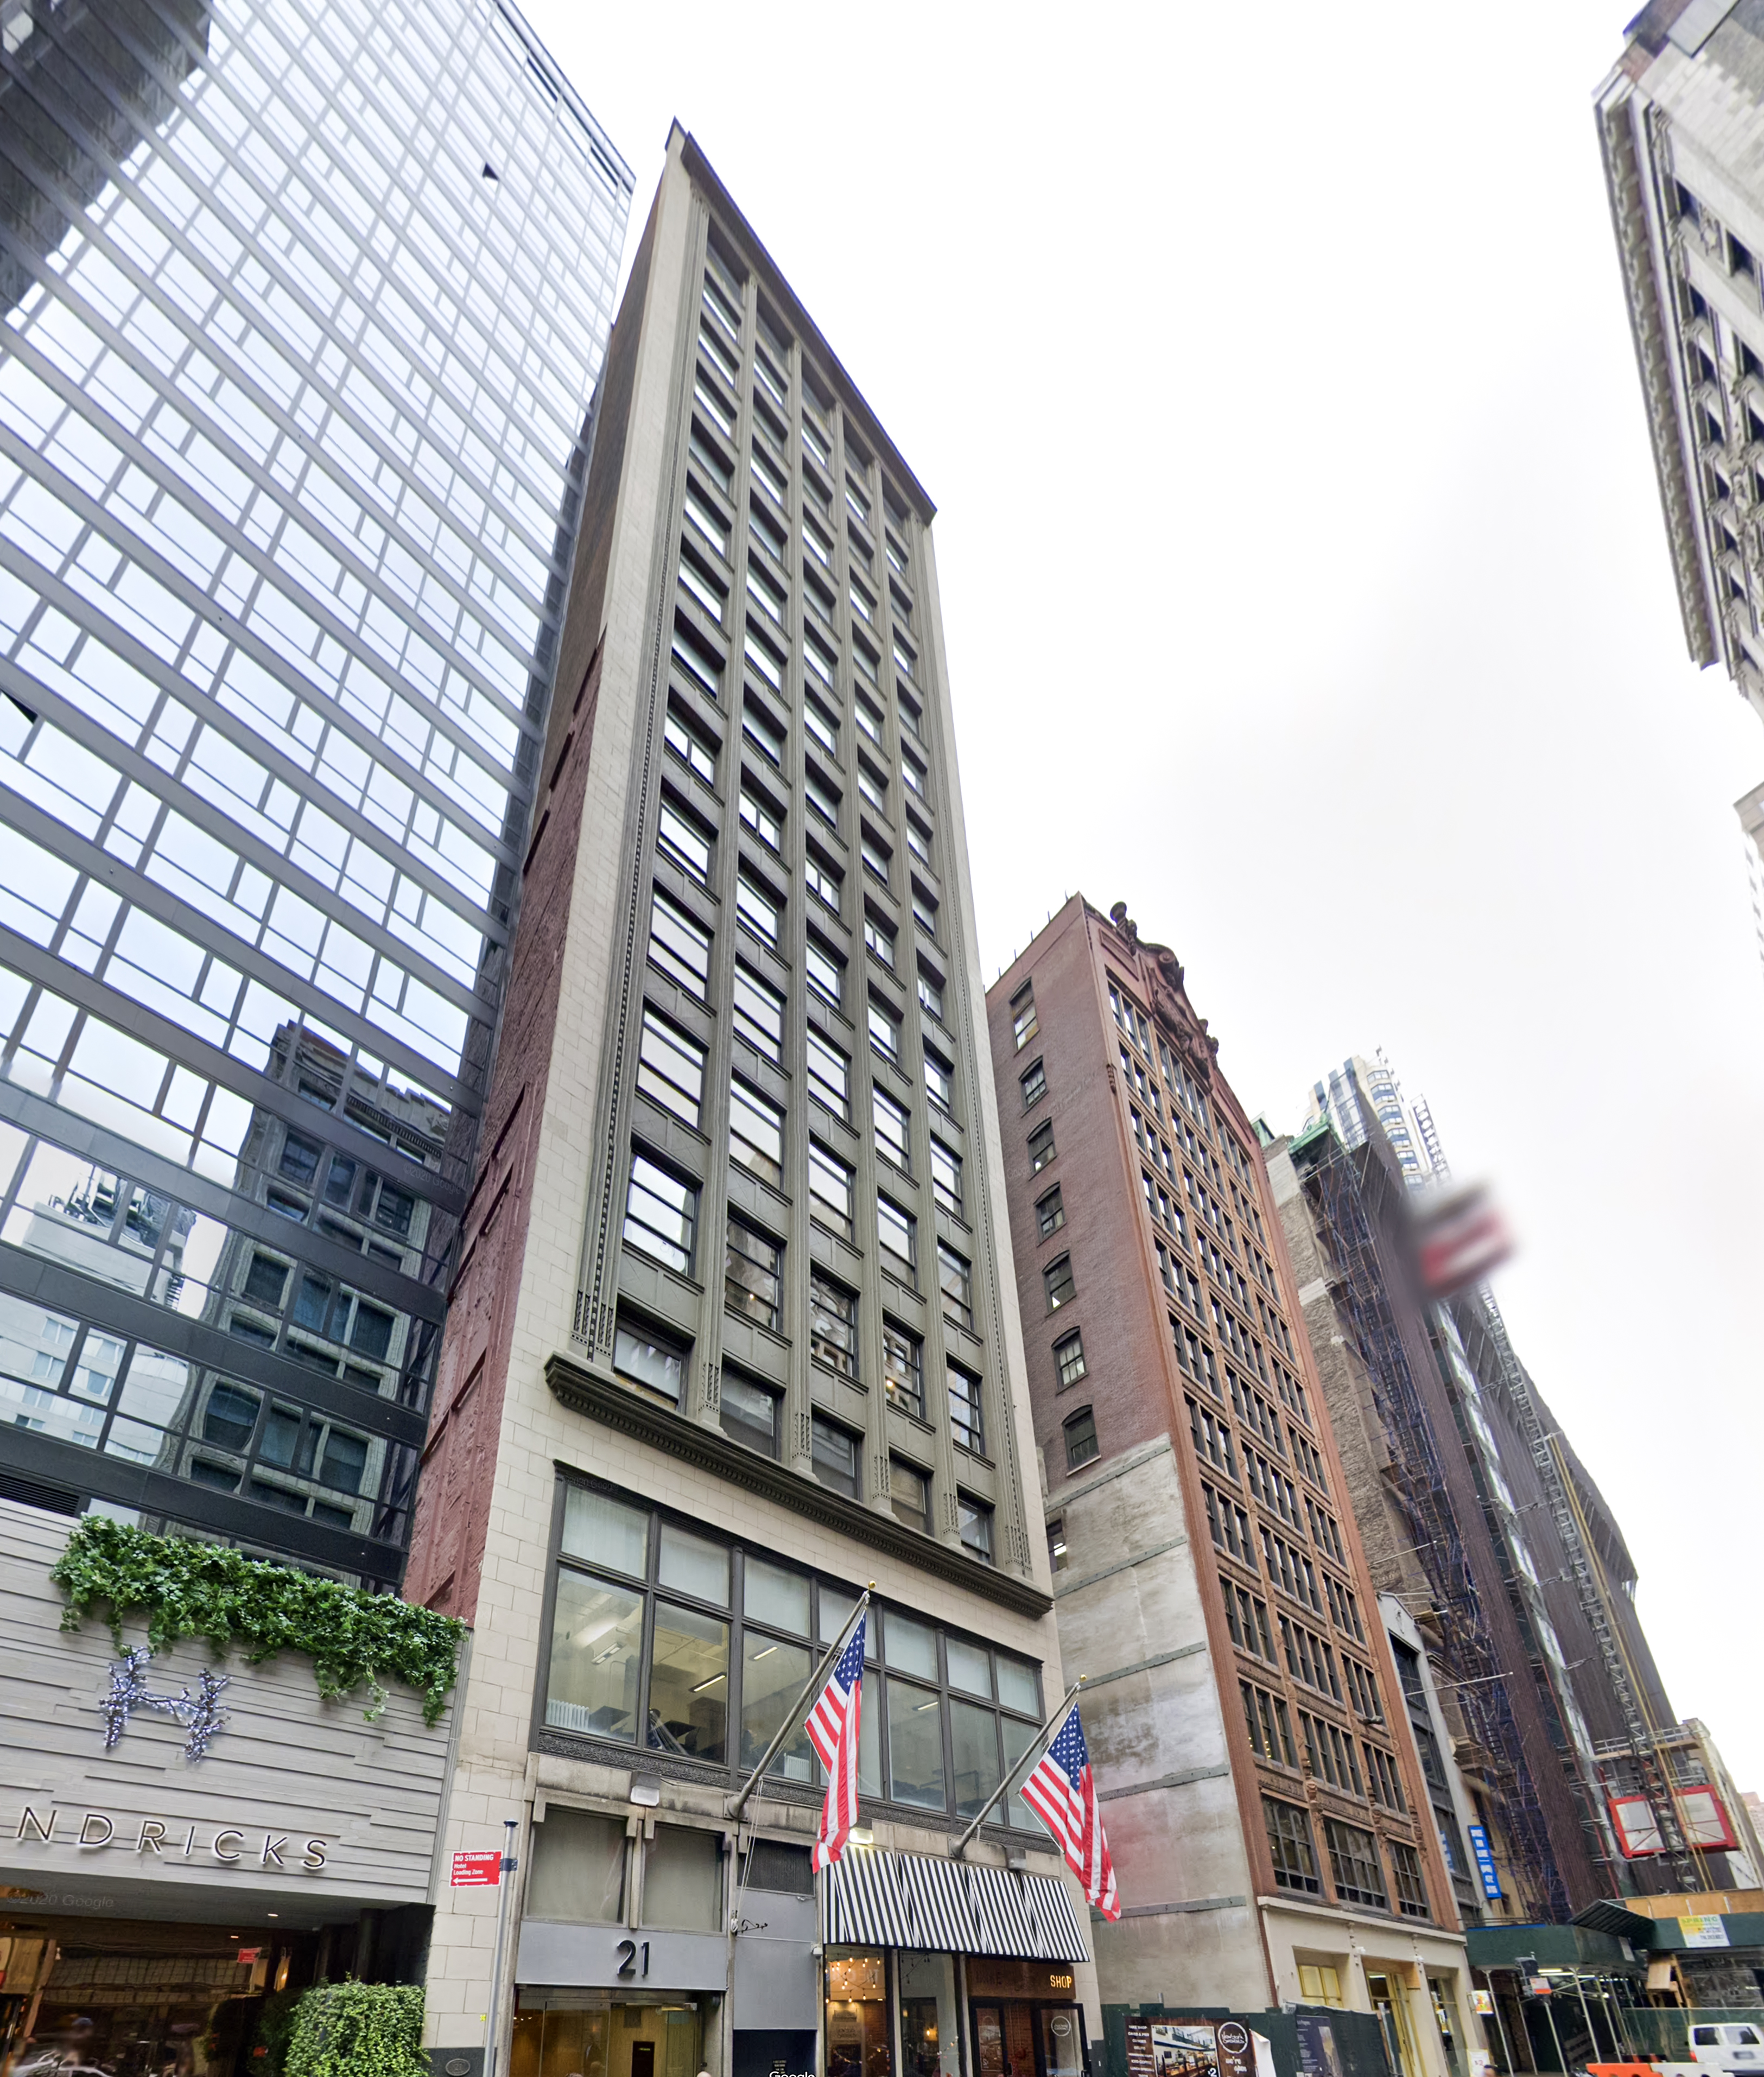 Avison Young brings Brause Realty Inc’s 21 West 38th Street and 330 East 59th Street to 100% occupancy during challenging market conditions